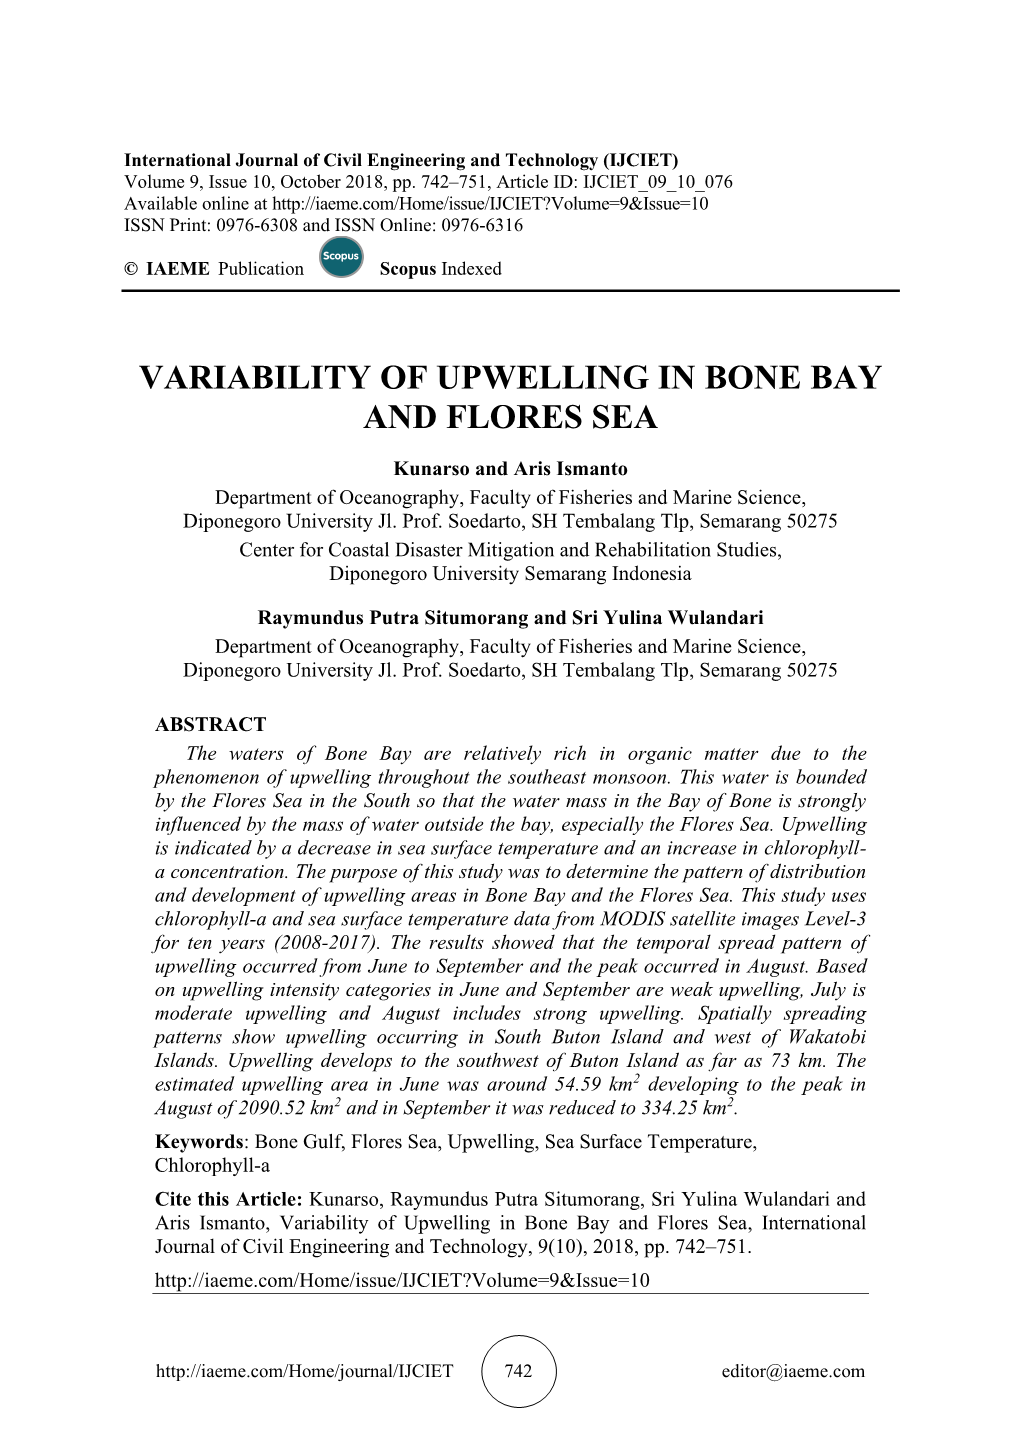 Variability of Upwelling in Bone Bay and Flores Sea